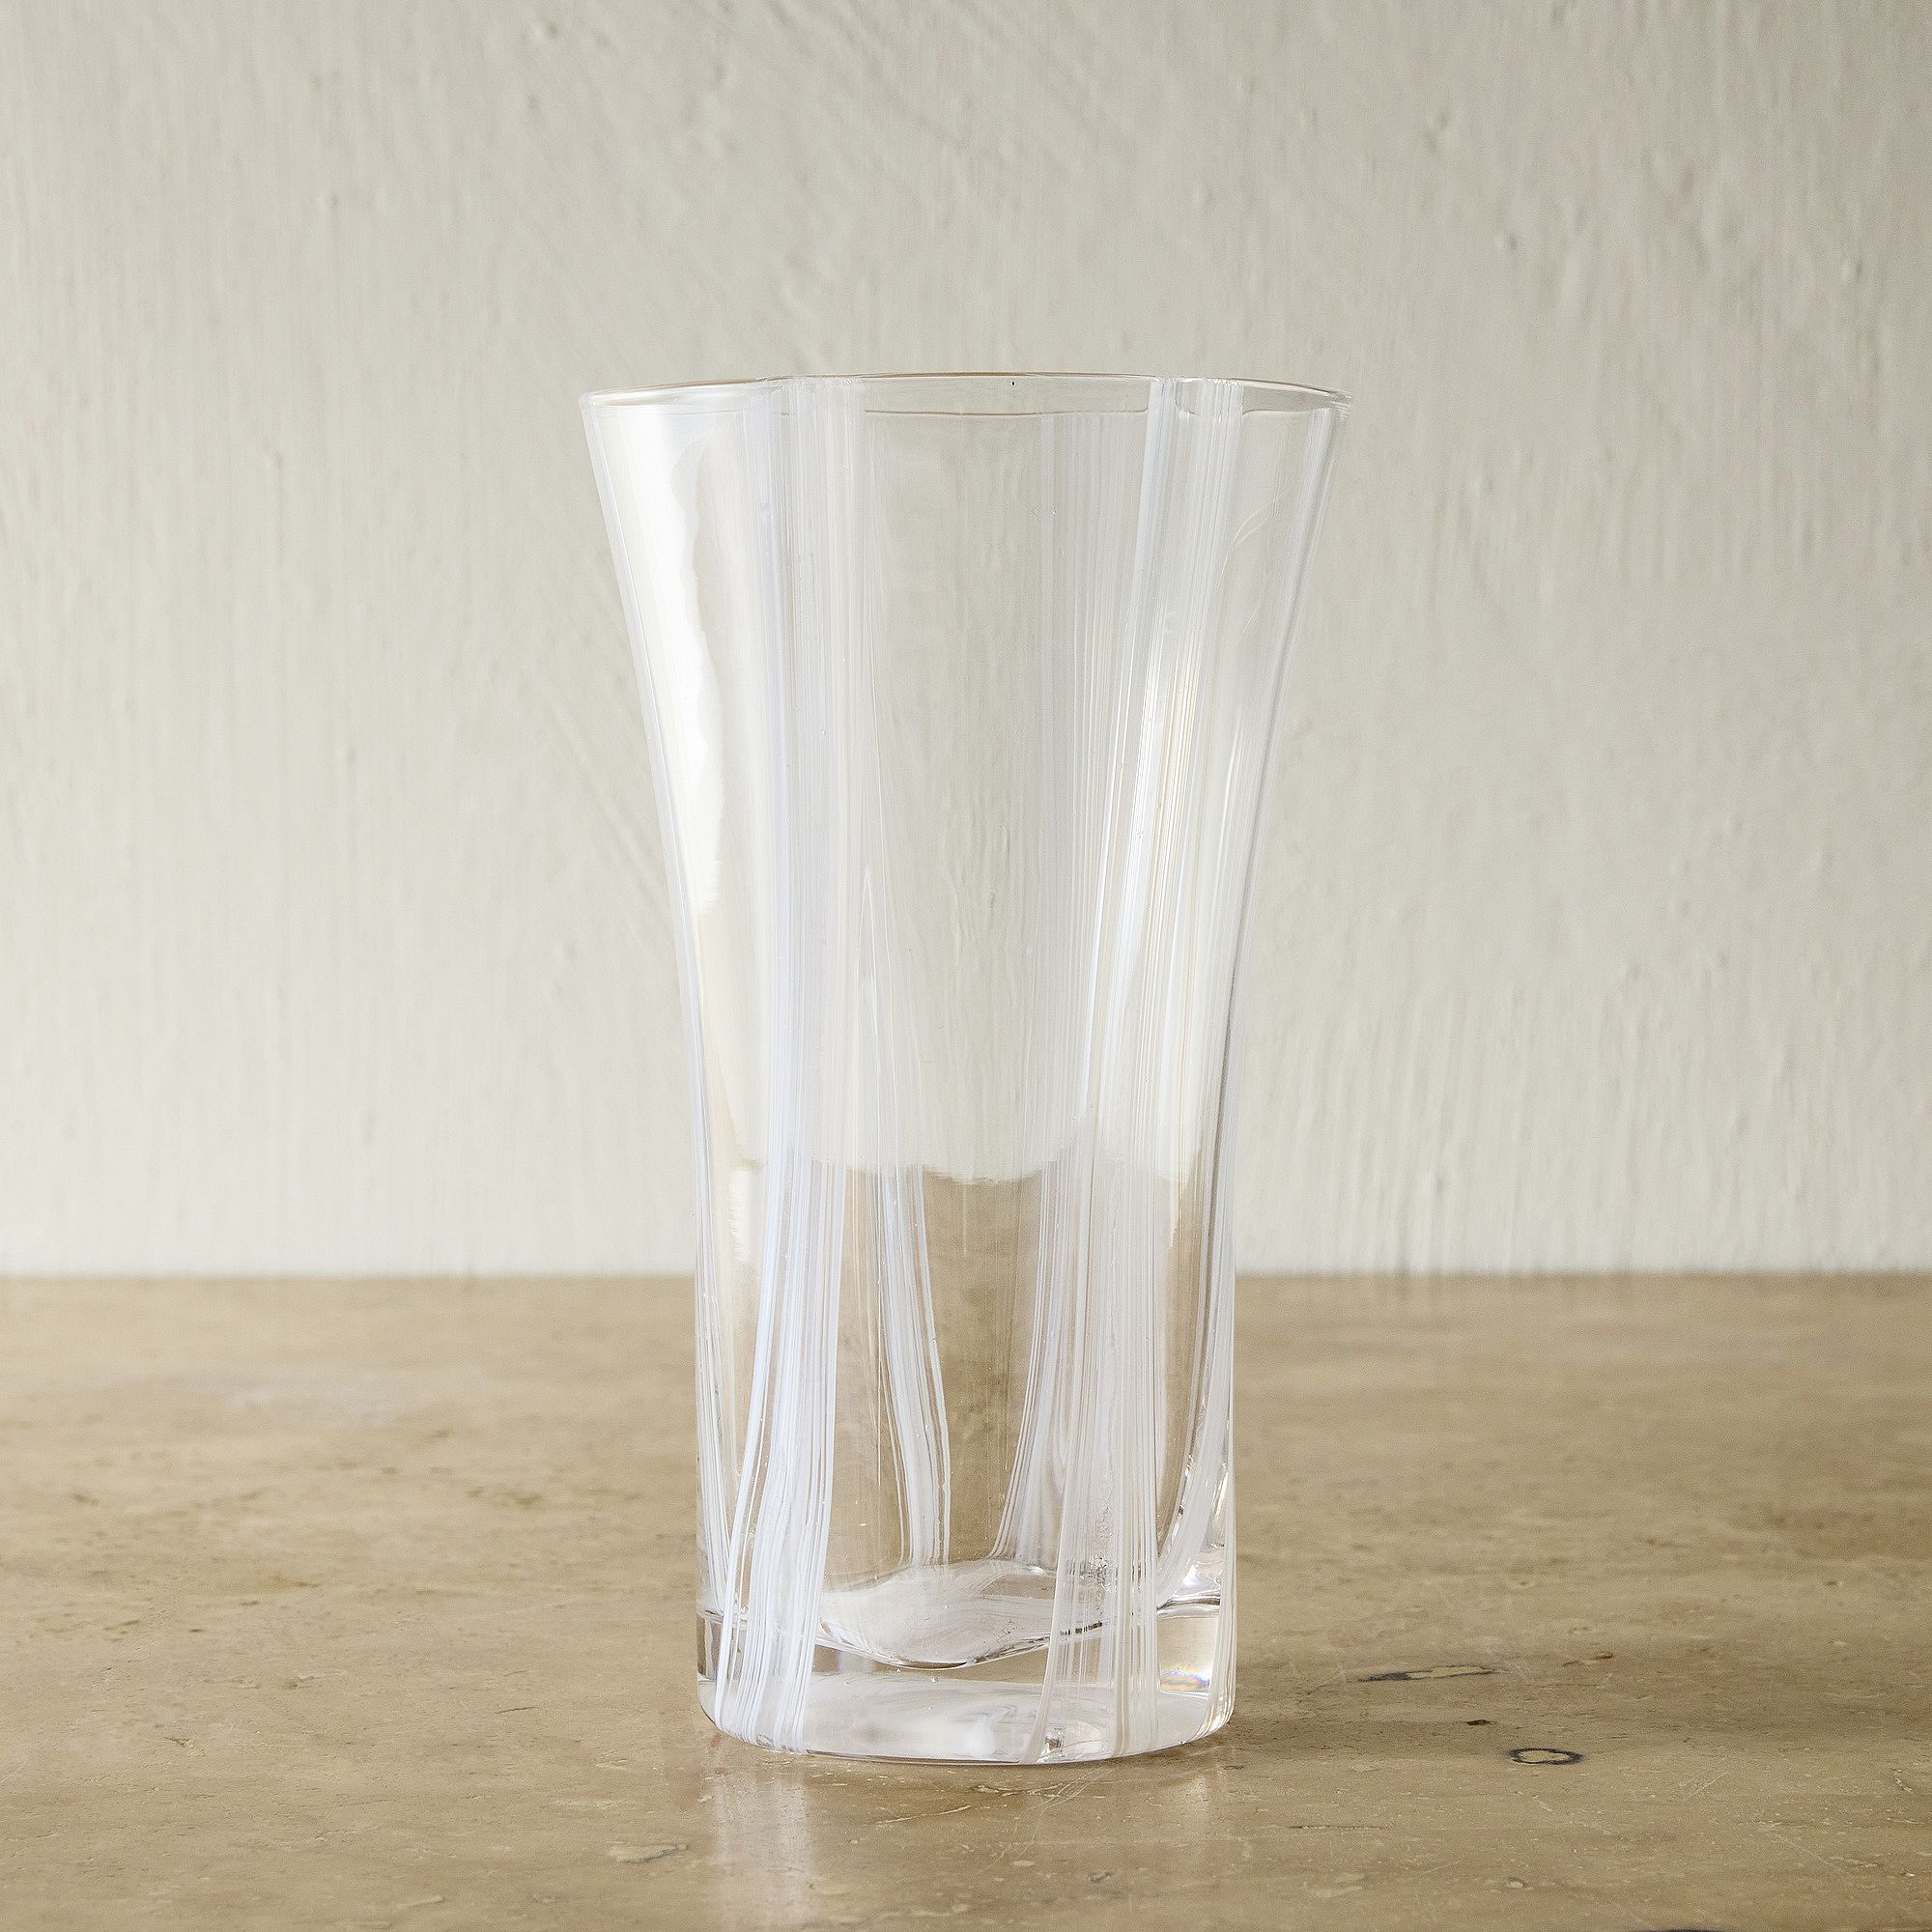 Caning Drinking Glasses | West Elm